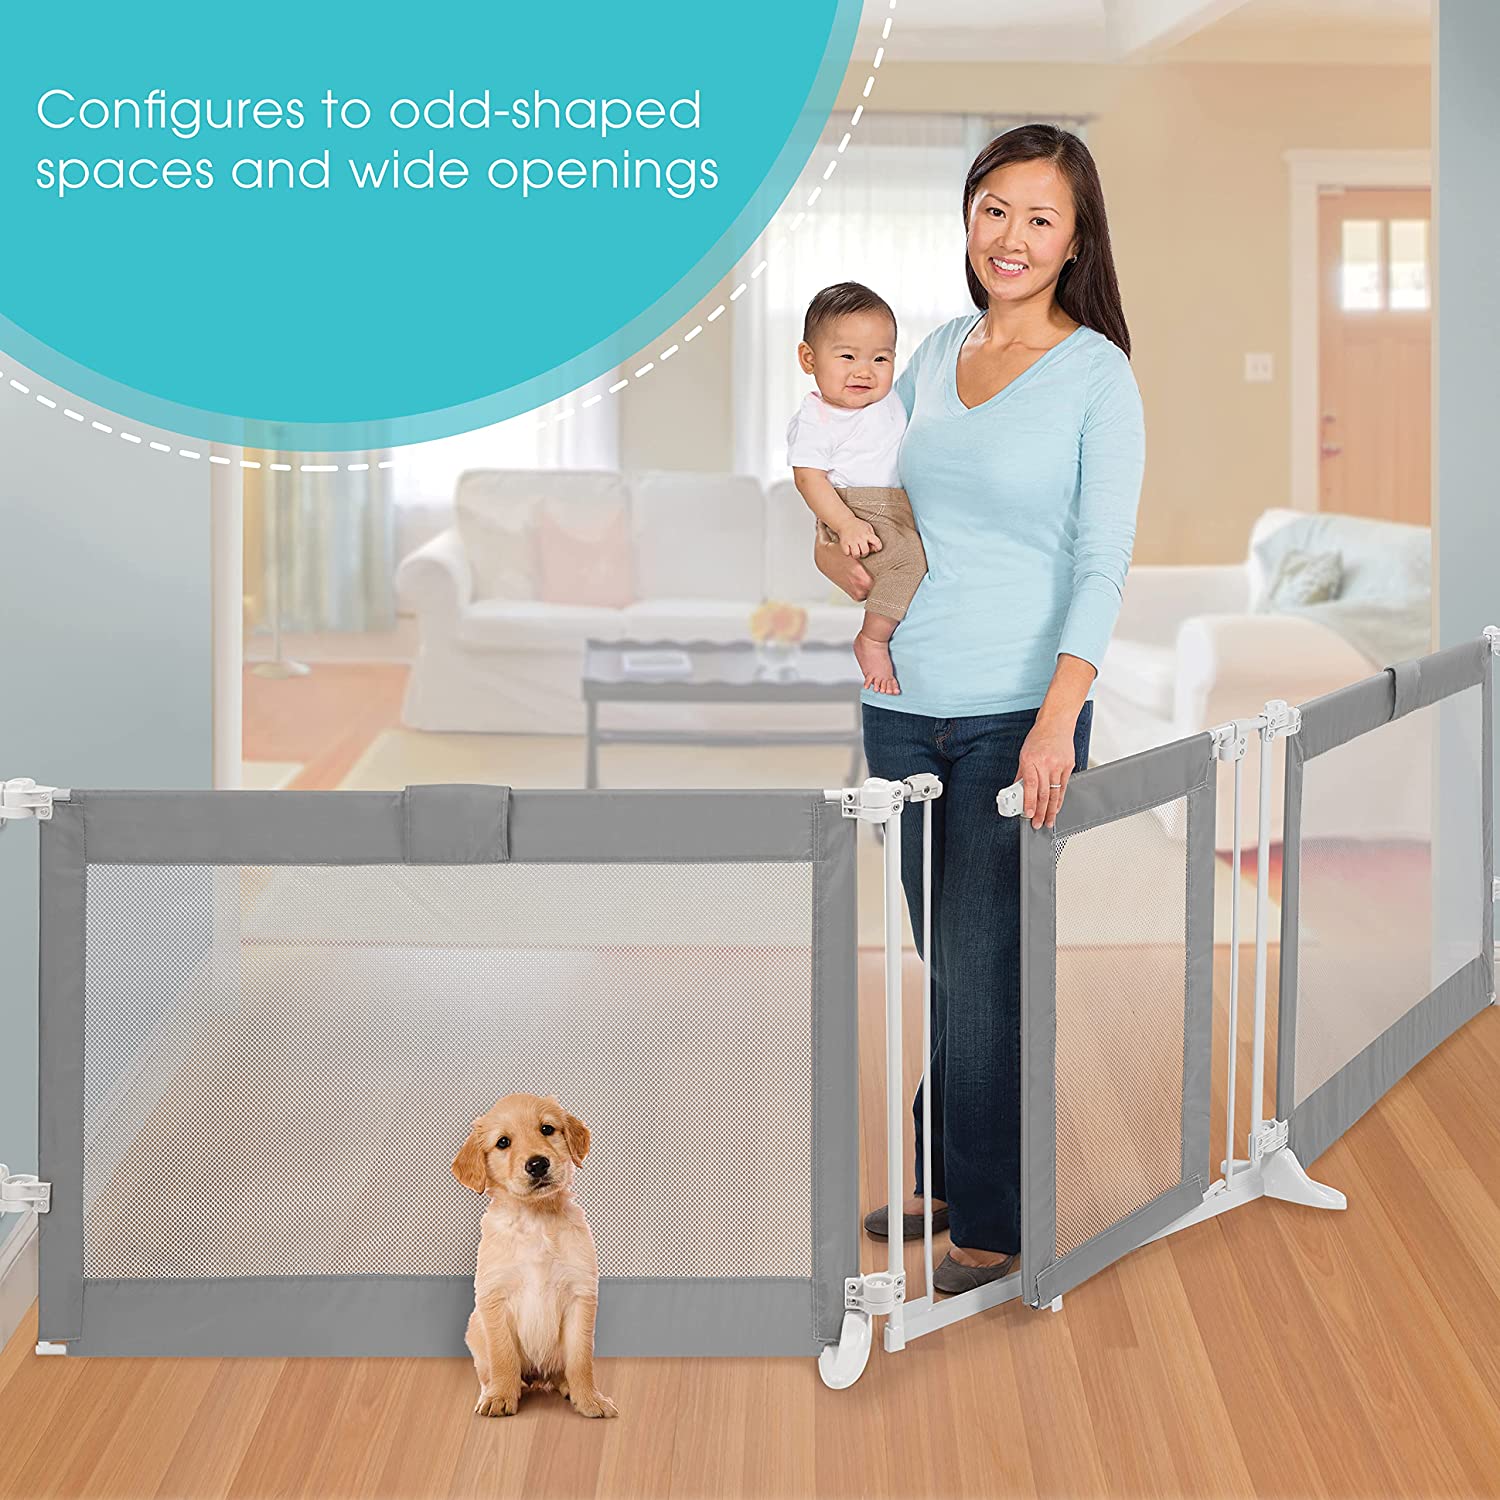 Summer Infant Custom Fit Walk-Thru Extra Wide Baby Gate, Stylish Grey Mesh 30 Tall, Fits Openings up 65 87 (2 panels) or 87 141 (3 panels), Baby and Pet Gate for Doorways - image 4 of 7